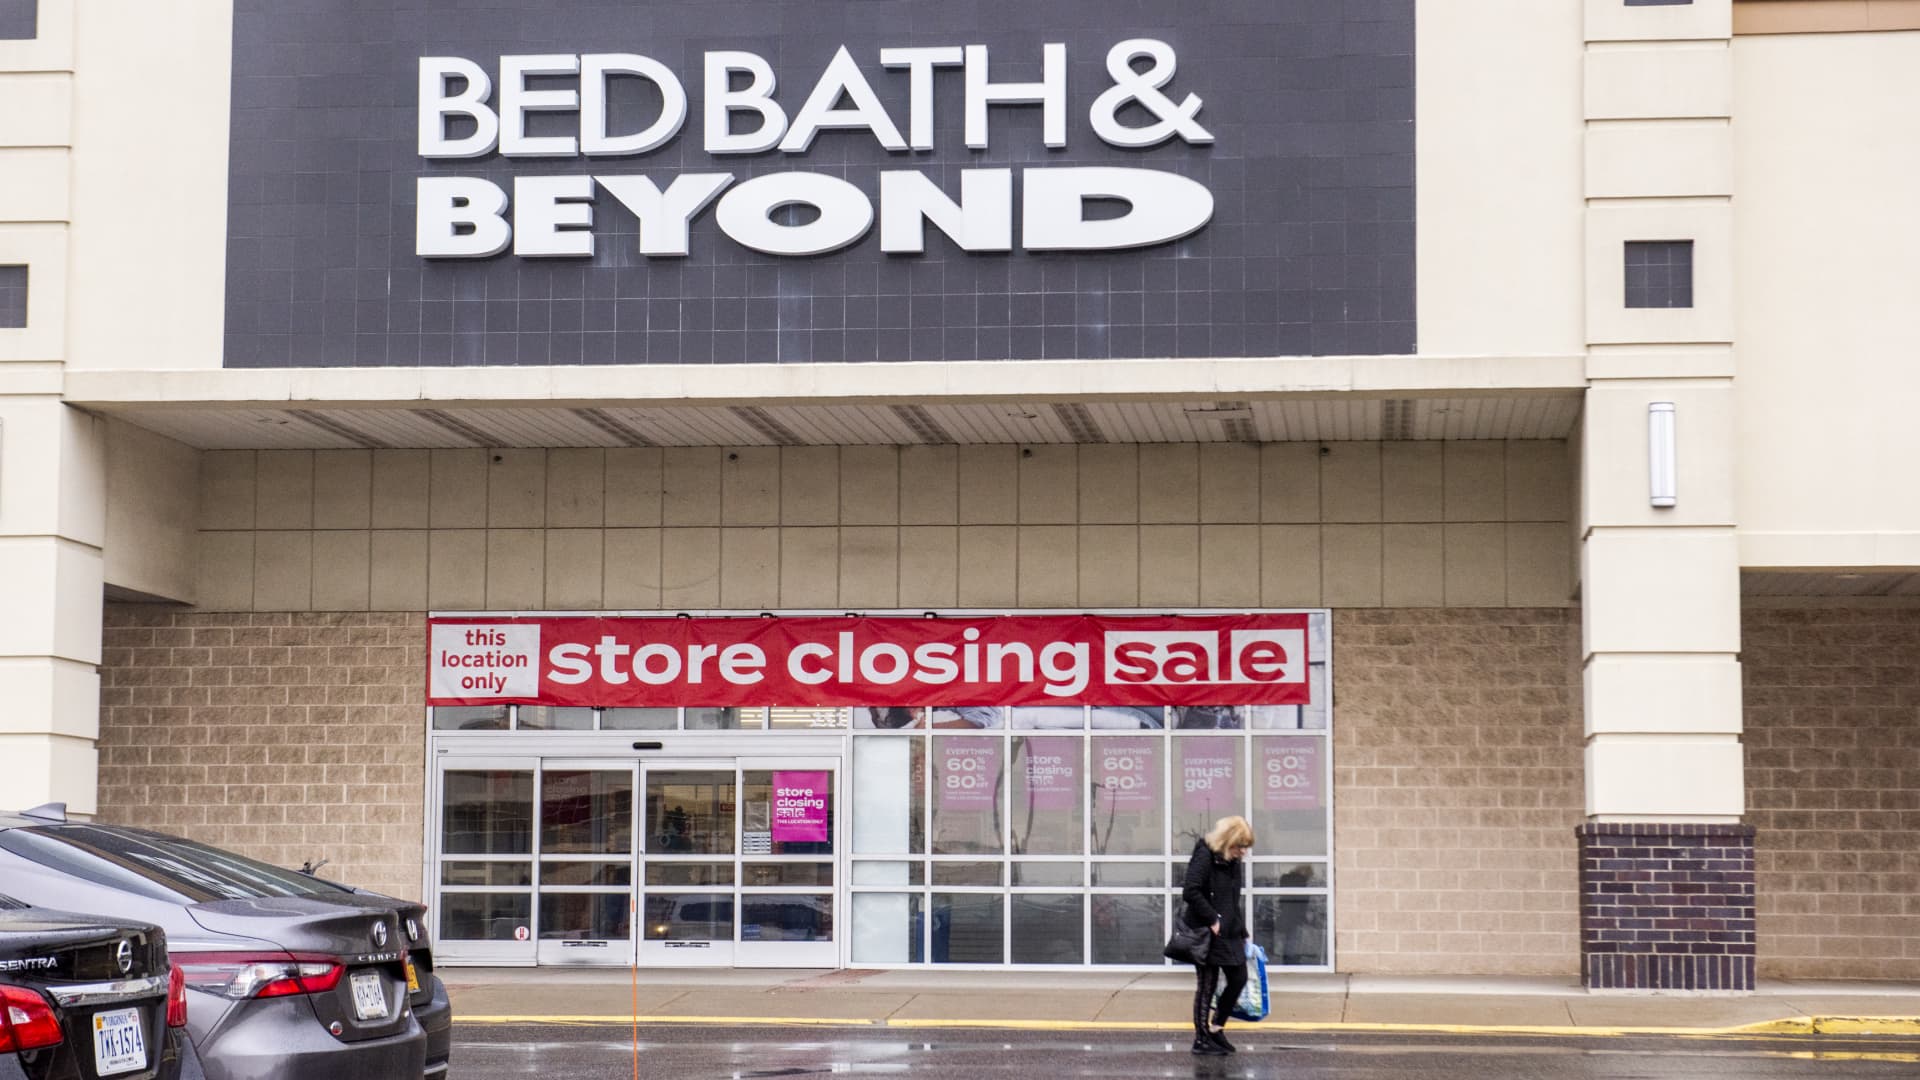 Bed Bath & Previous files for financial break protection after failed turnaround efforts